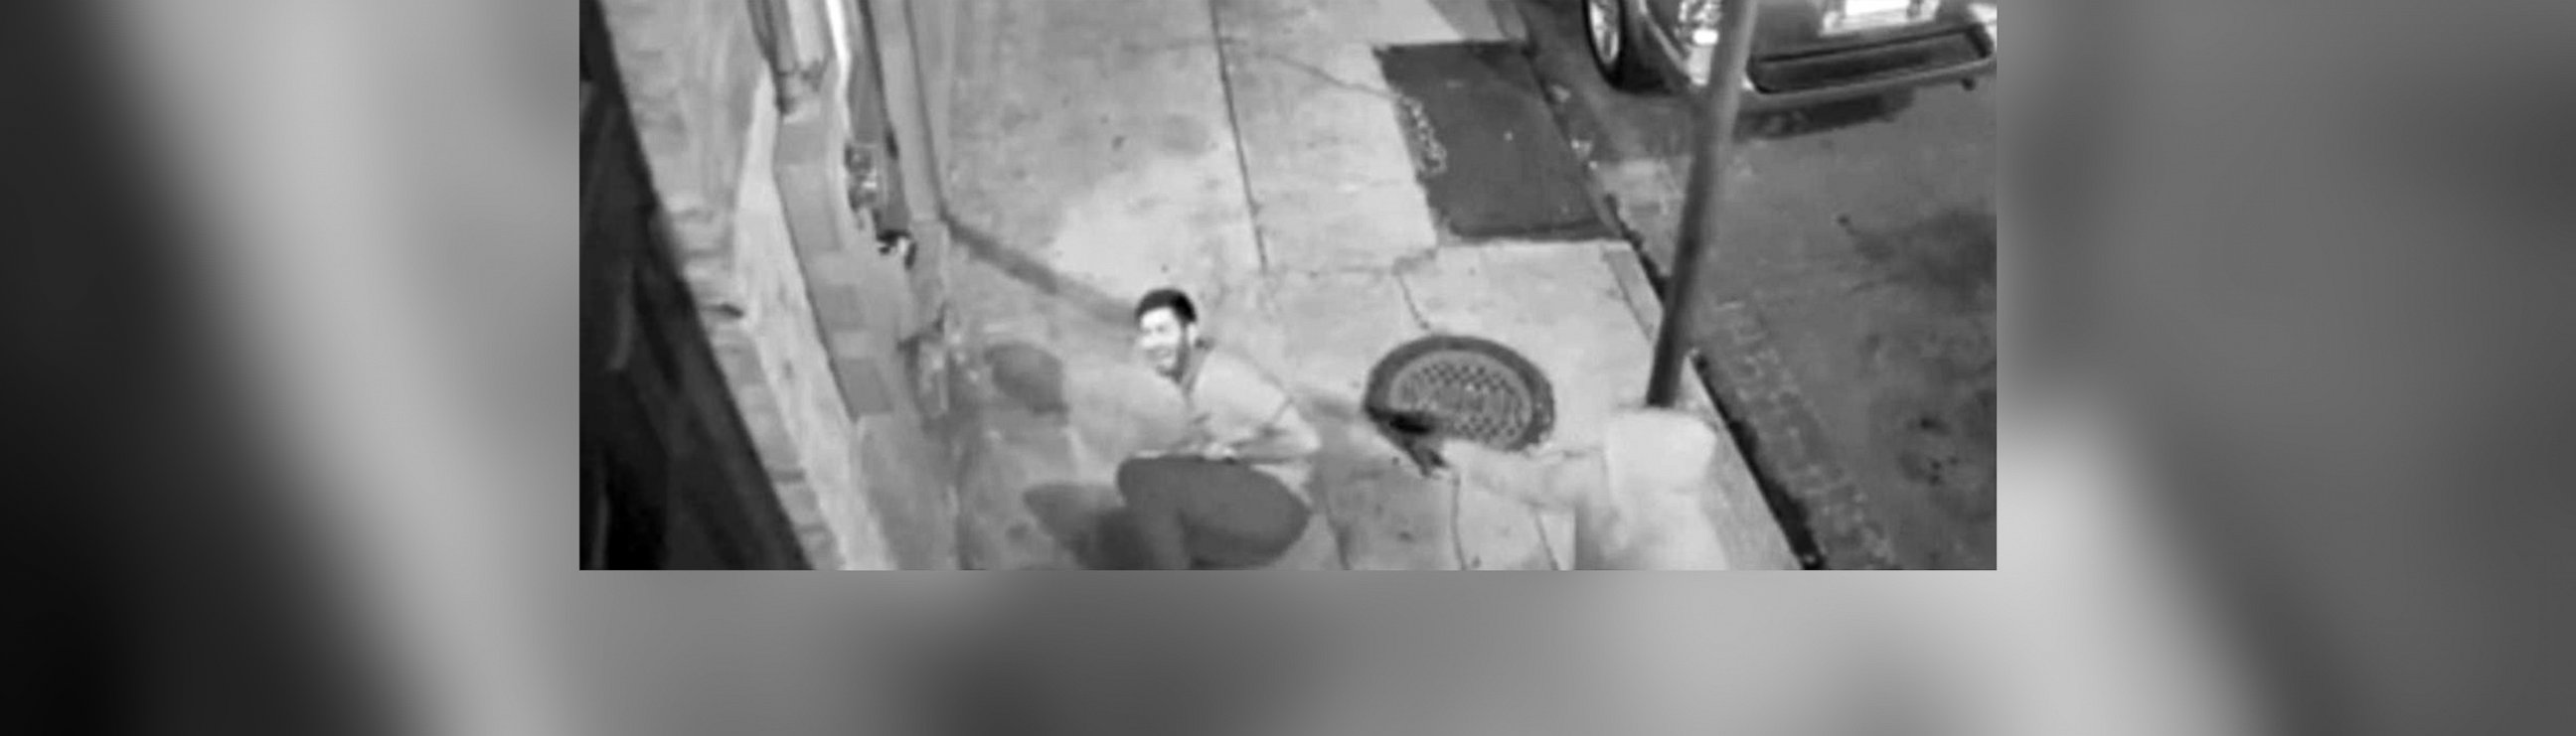 PHOTO: Surveillance video released by police shows a man that they identified as suspect Euric Cain targeting medical student Peter Cold on Nov. 20, 2015 in New Orleans. 